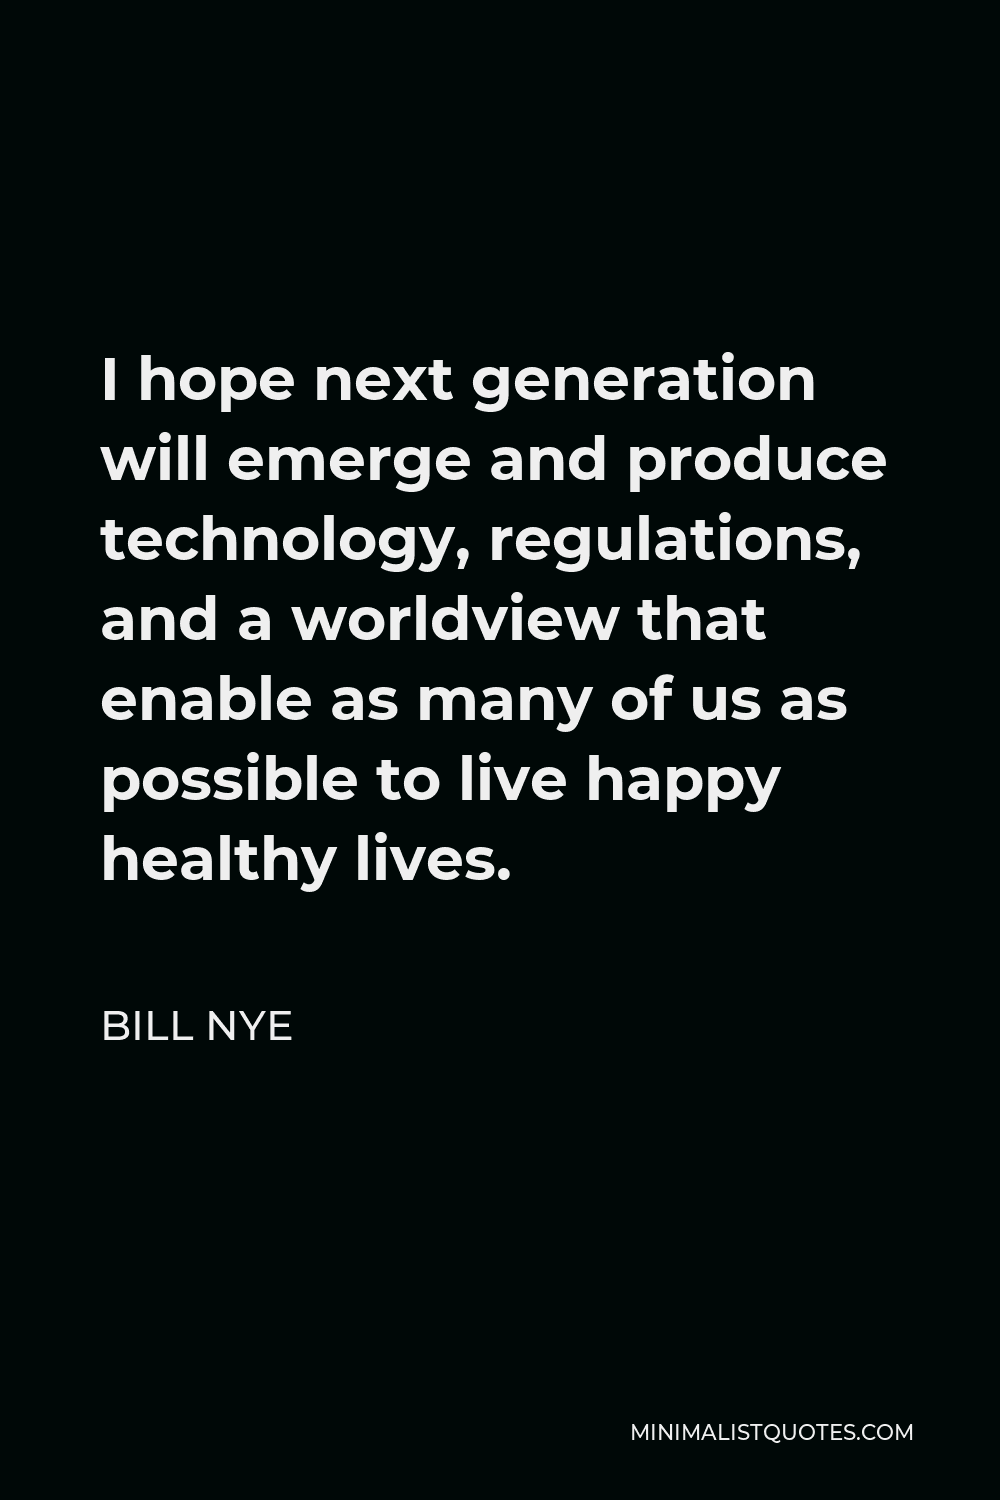 Bill Nye Quote - I hope next generation will emerge and produce technology, regulations, and a worldview that enable as many of us as possible to live happy healthy lives.